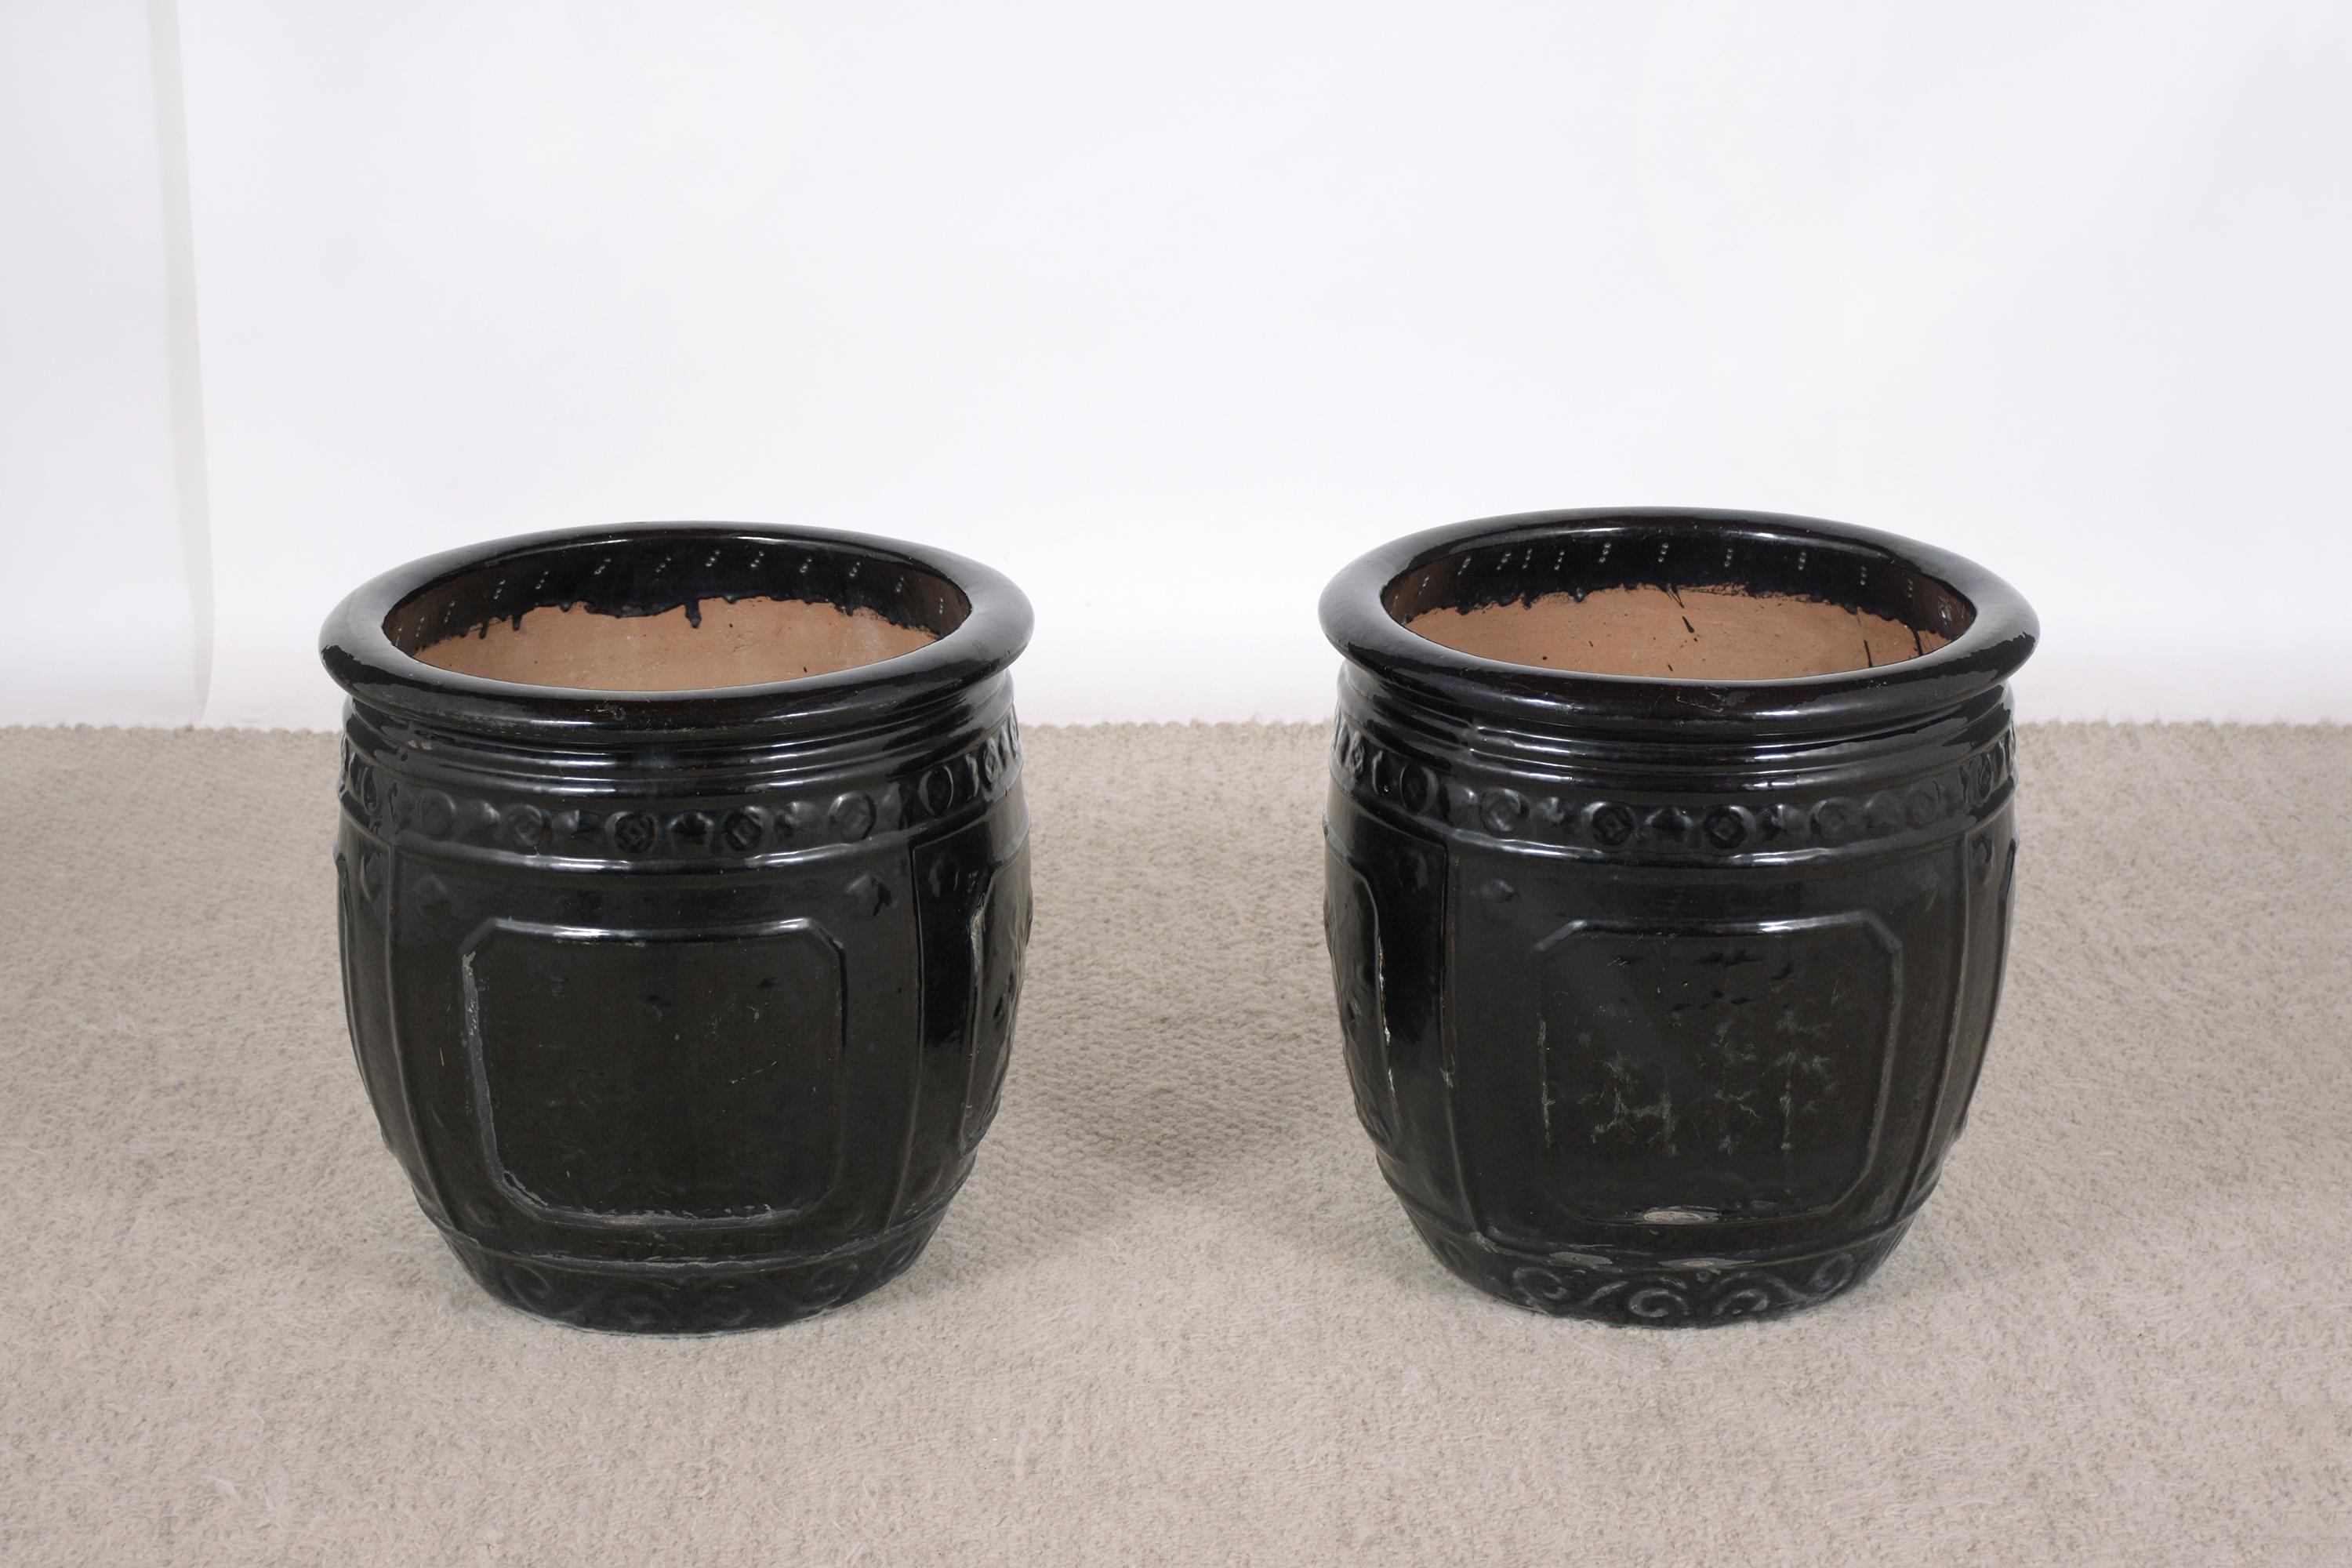 An extraordinary pair of large ceramic planters in good condition. This fabulous pair of garden planters feature a beautiful design accentuated moldings decorations around painted in black color with a beautiful glazed finish. Base diameter 16